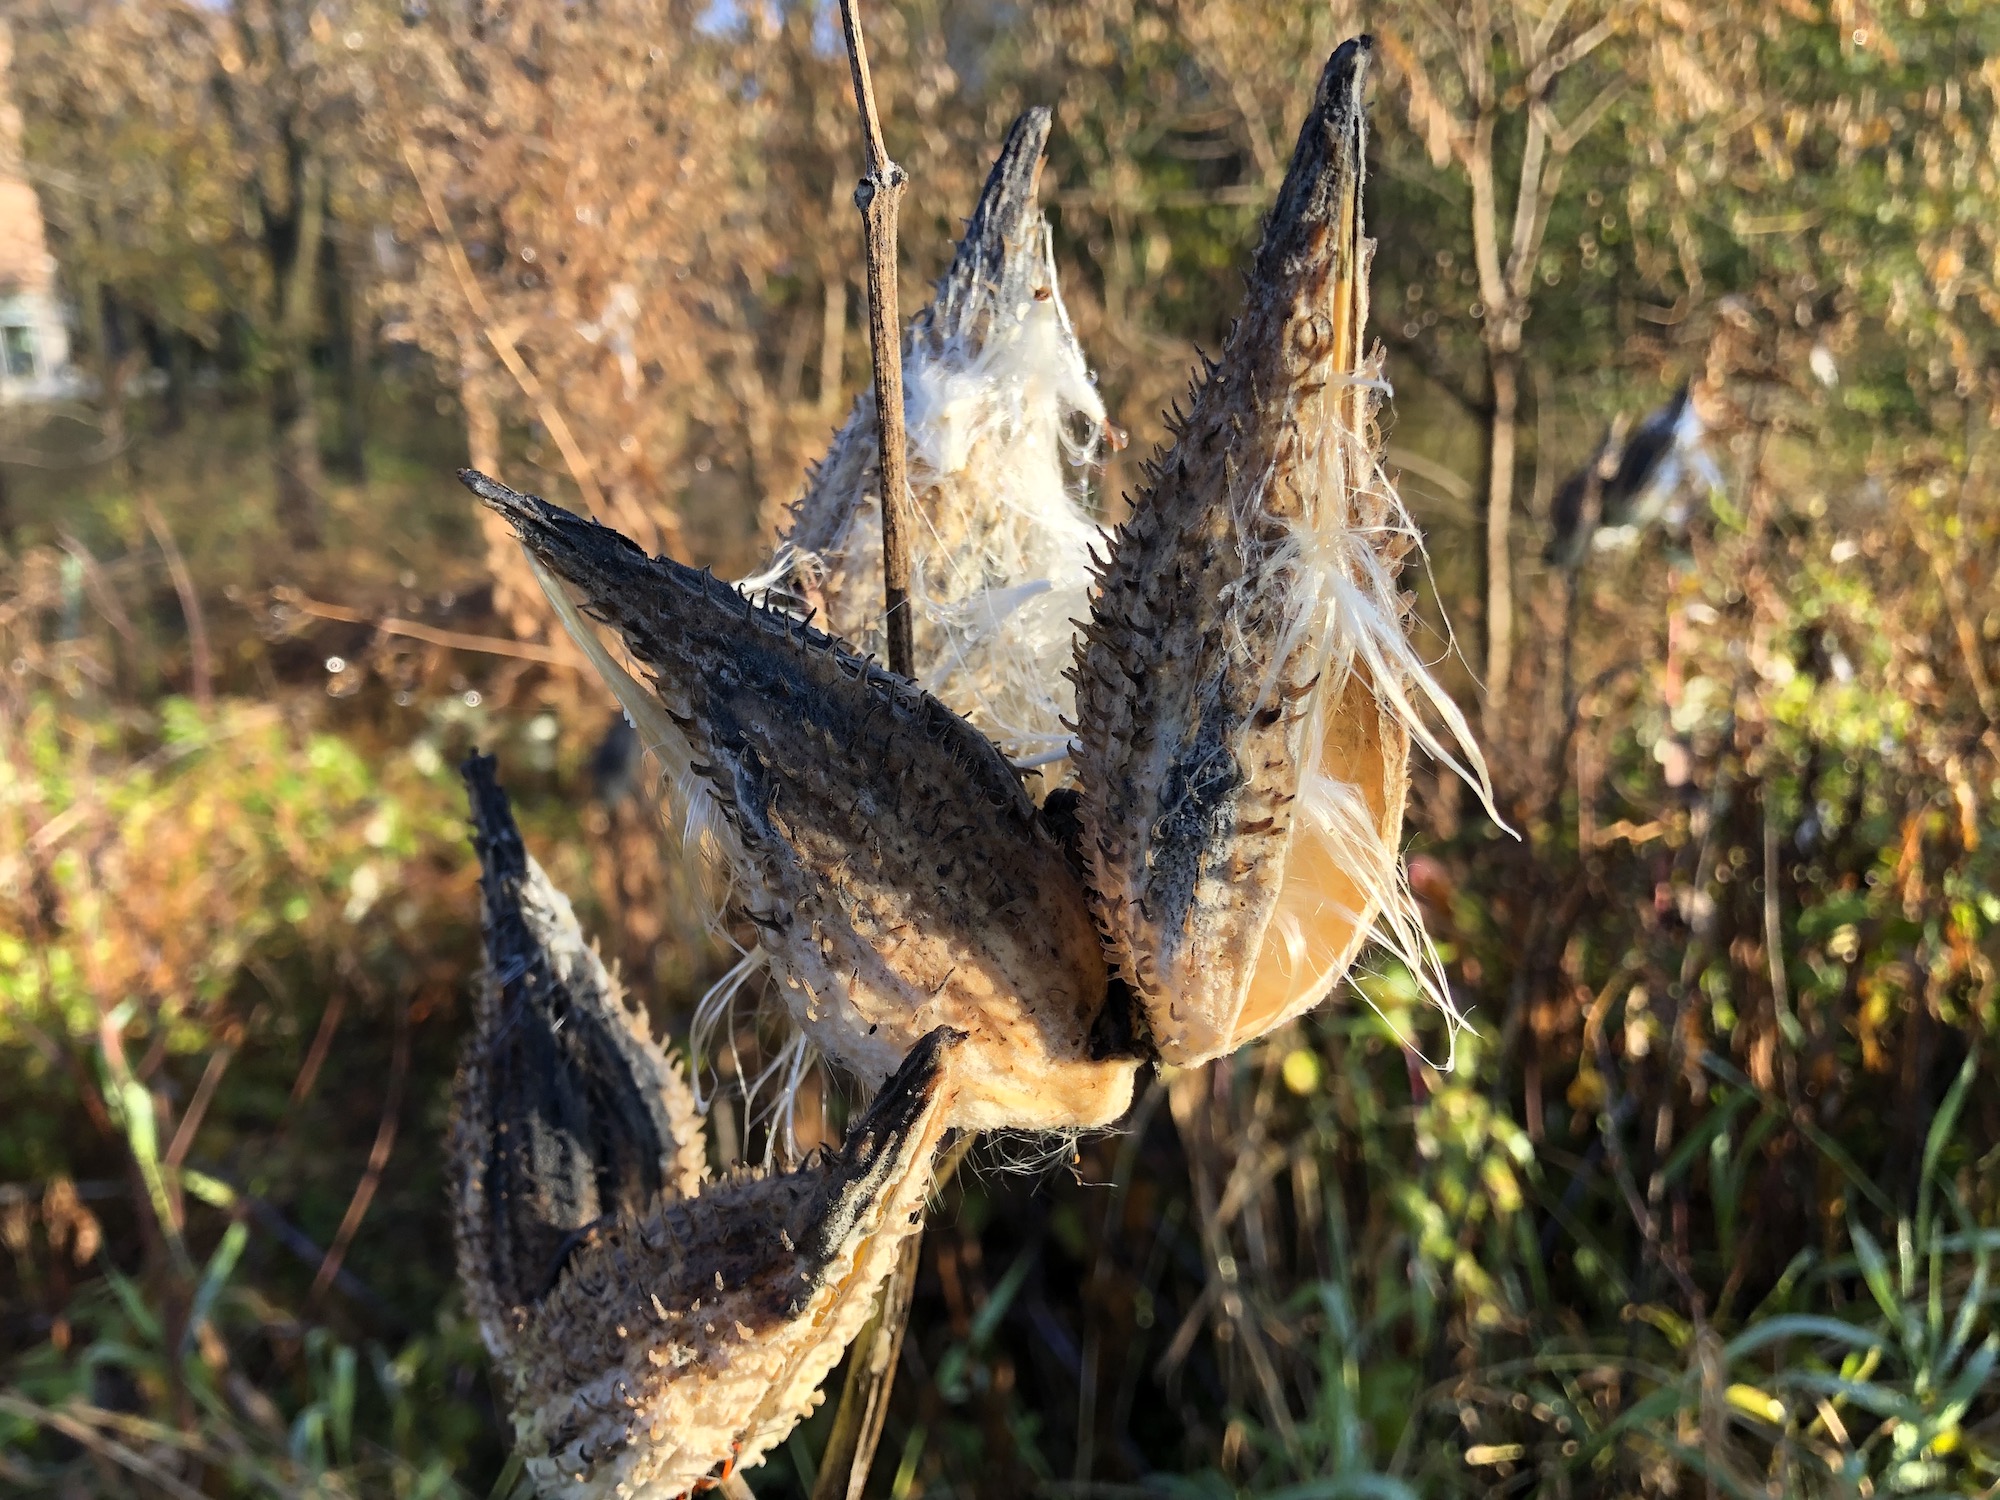 Common Milkweed on shore of Marion Dunn Pond on October 27, 2019.